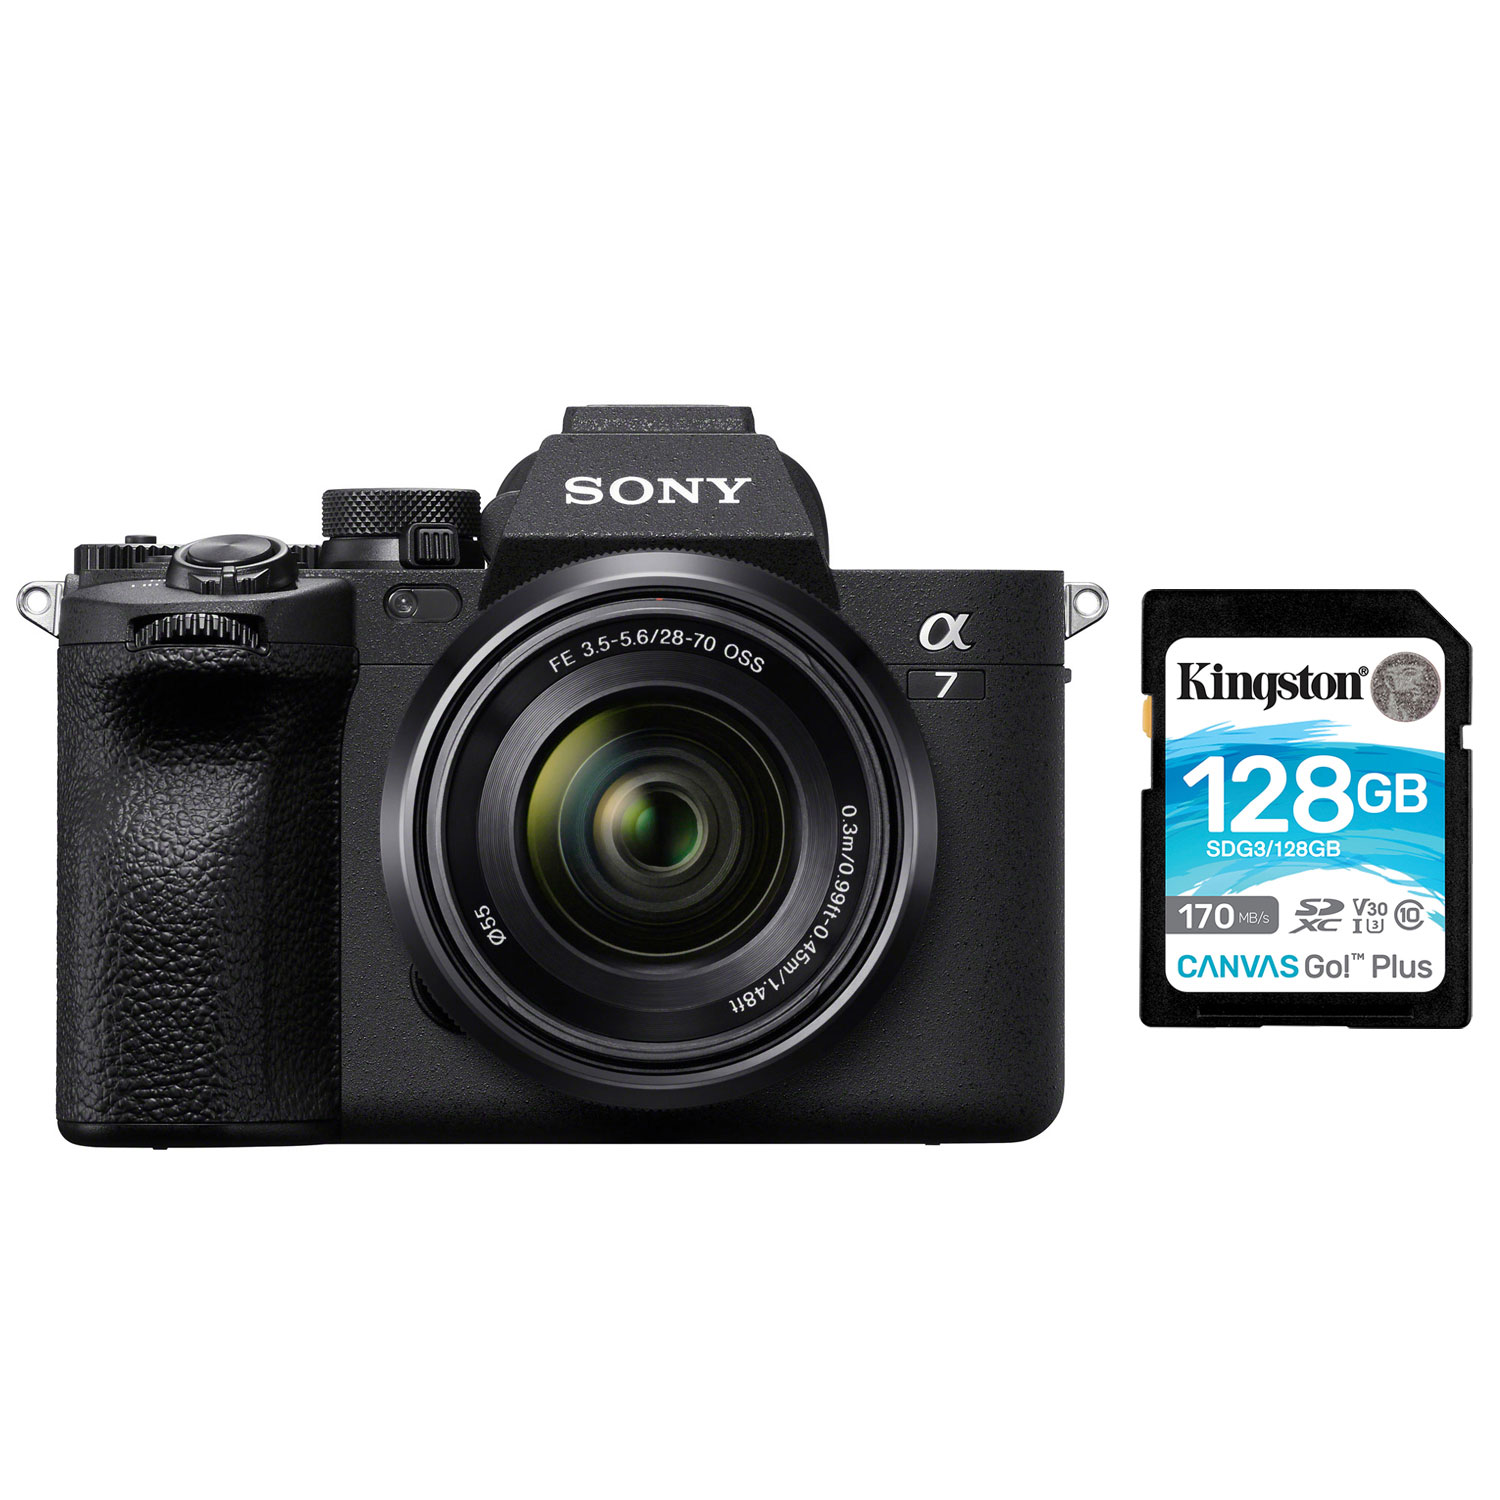 Sony Alpha 7 IV Full-Frame Mirrorless Camera with 28-70mm Lens Kit & 128GB 170MB/s SDXC Memory Card